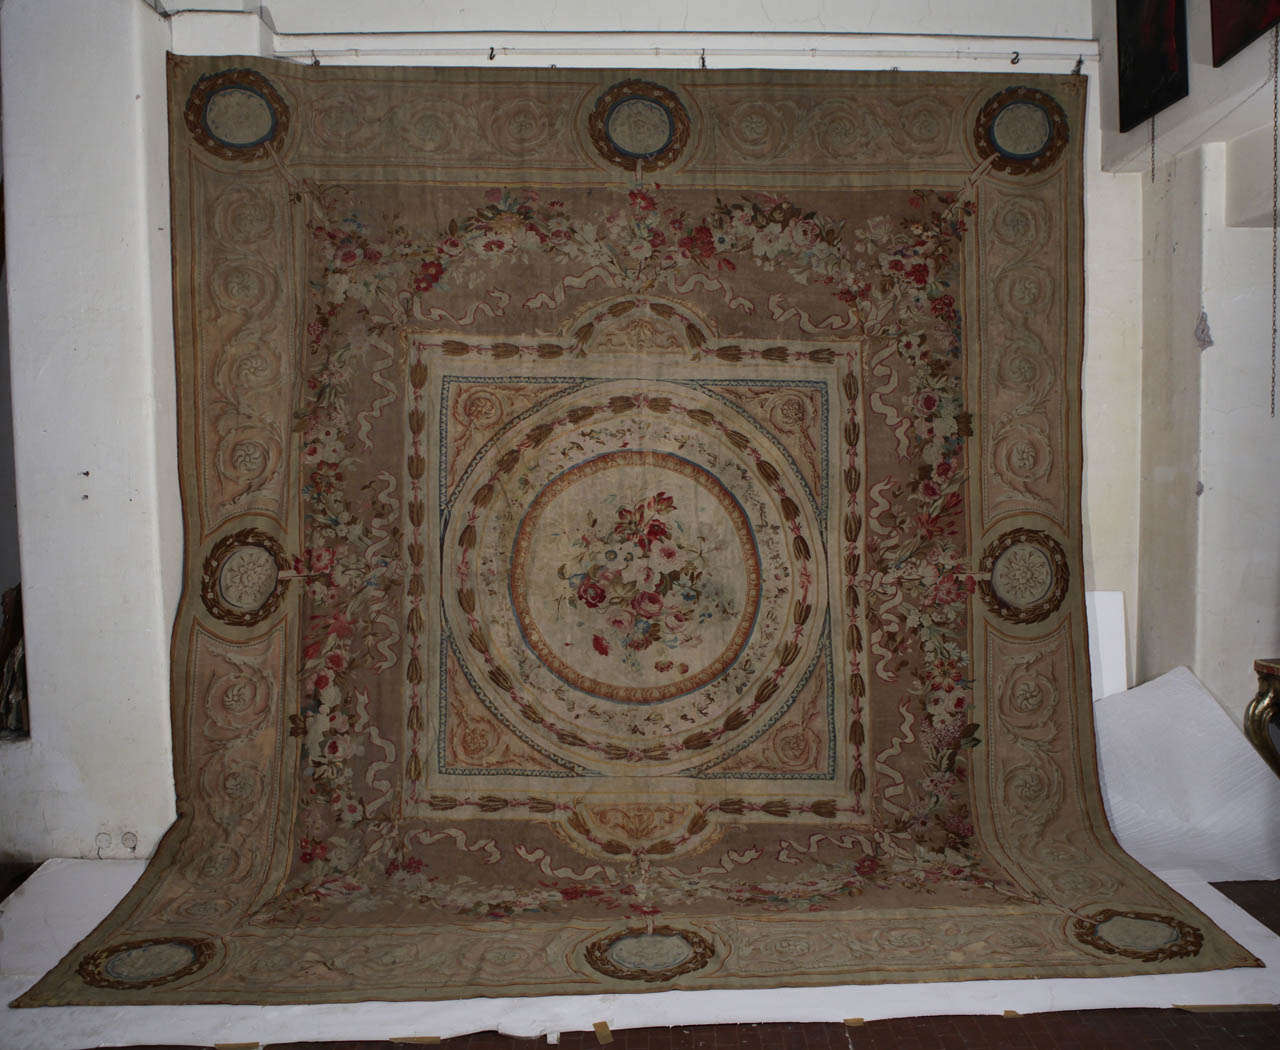 A very fine French Aubusson carpet of the 19th century.
Measures: cm 530 x 480.